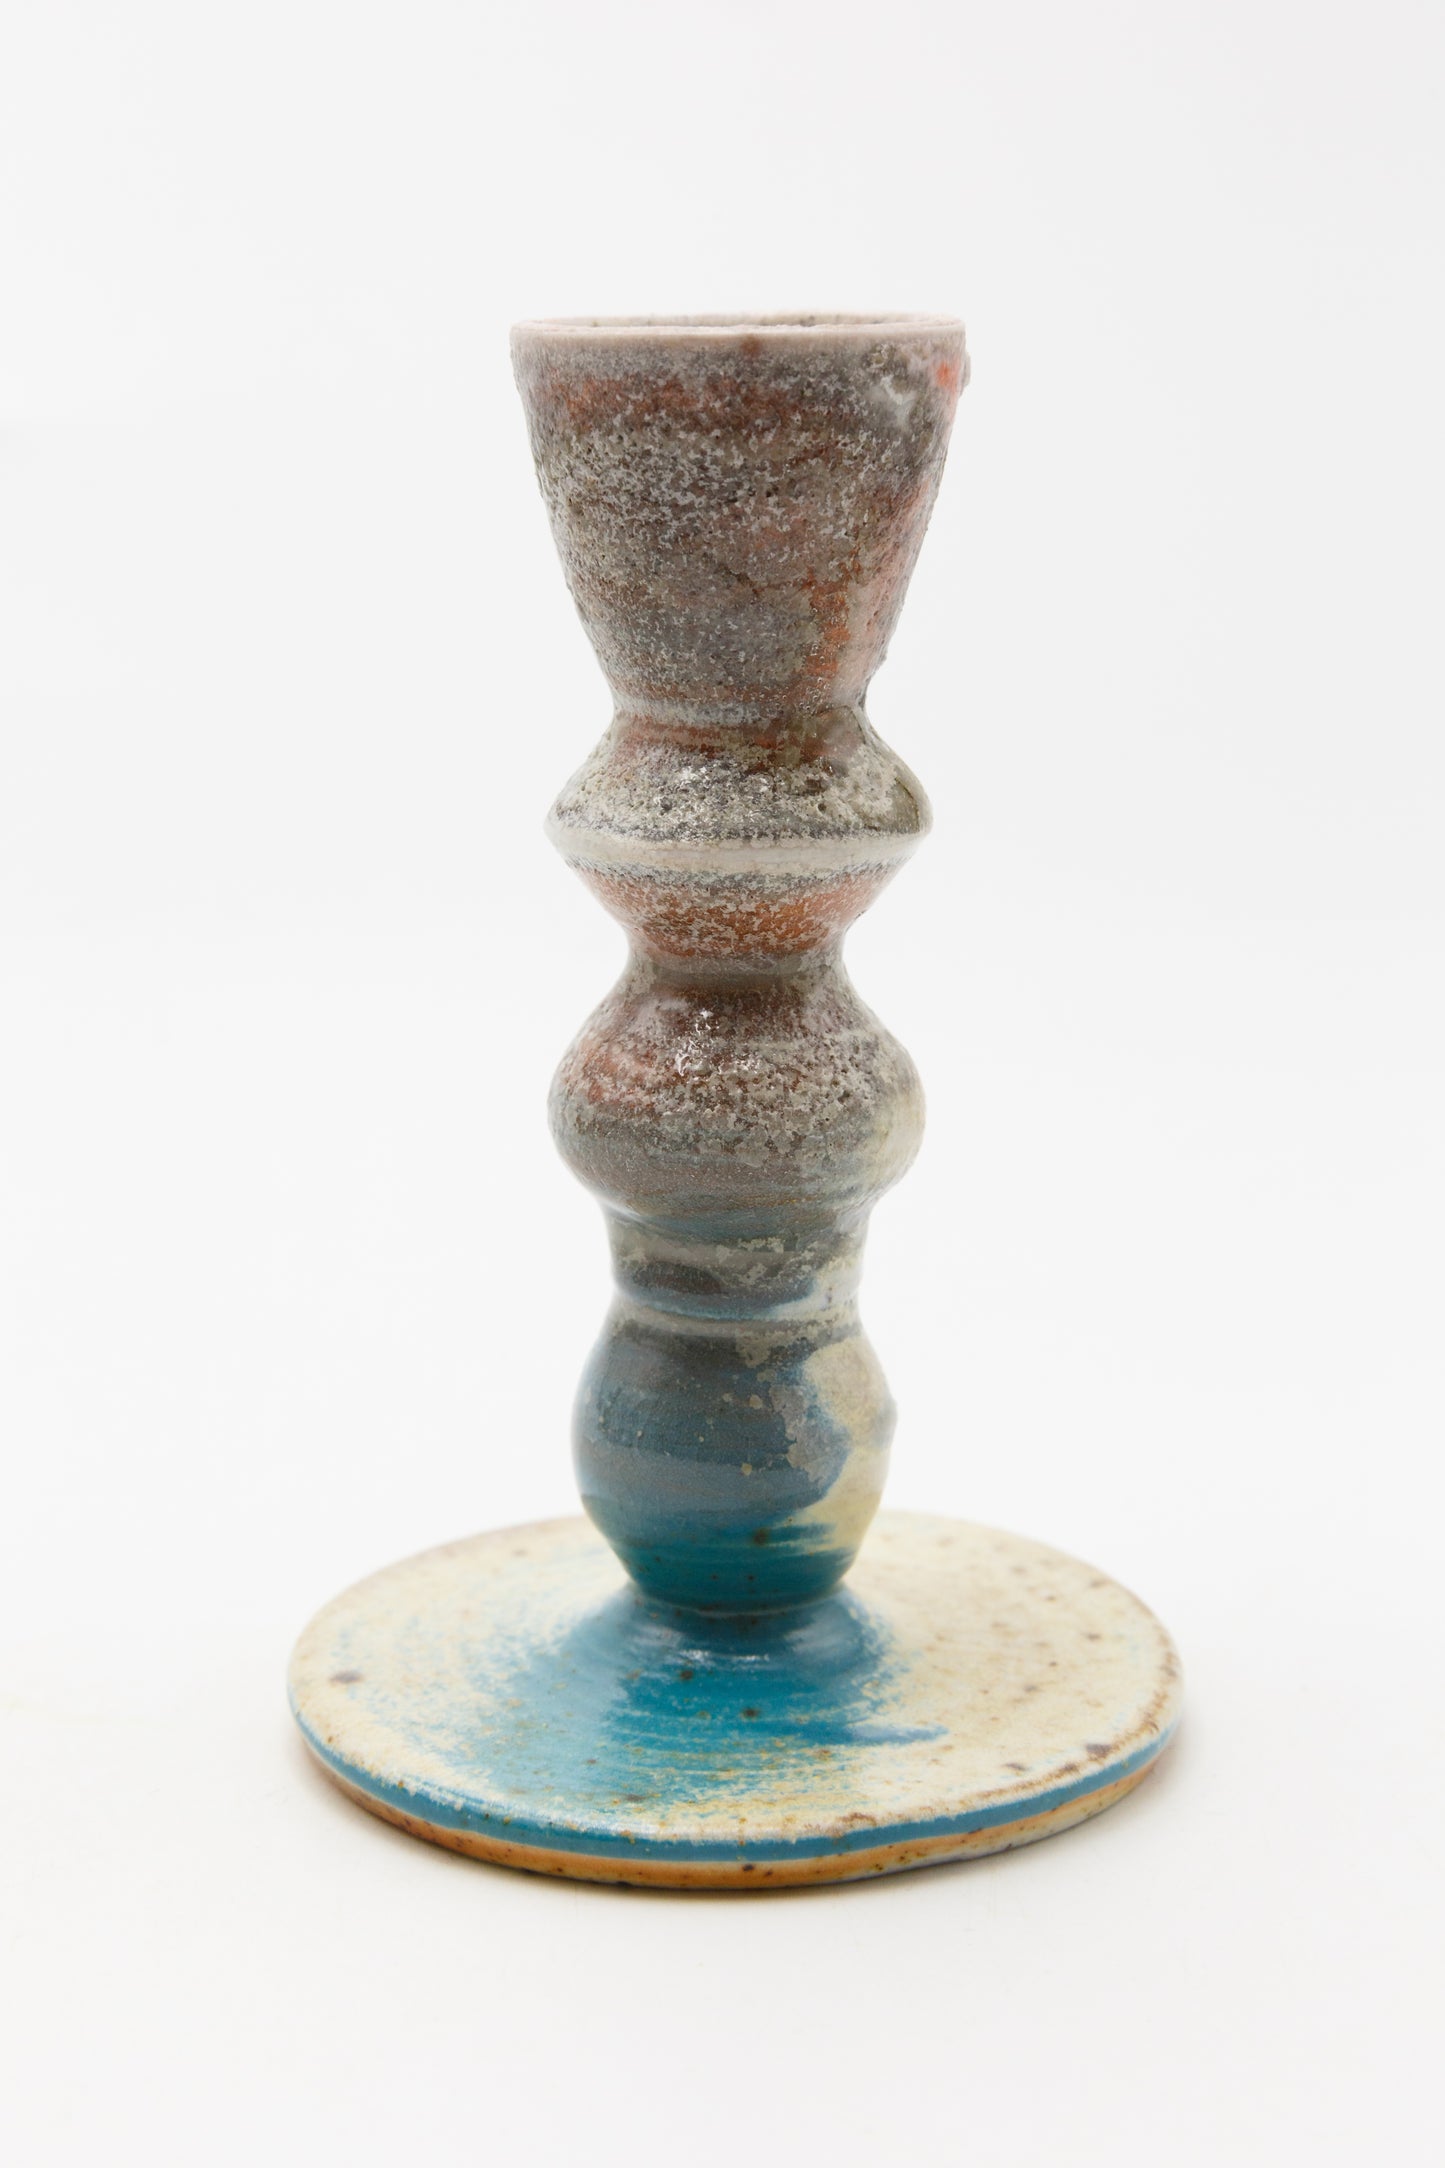 Wood Fired Candlestick 006